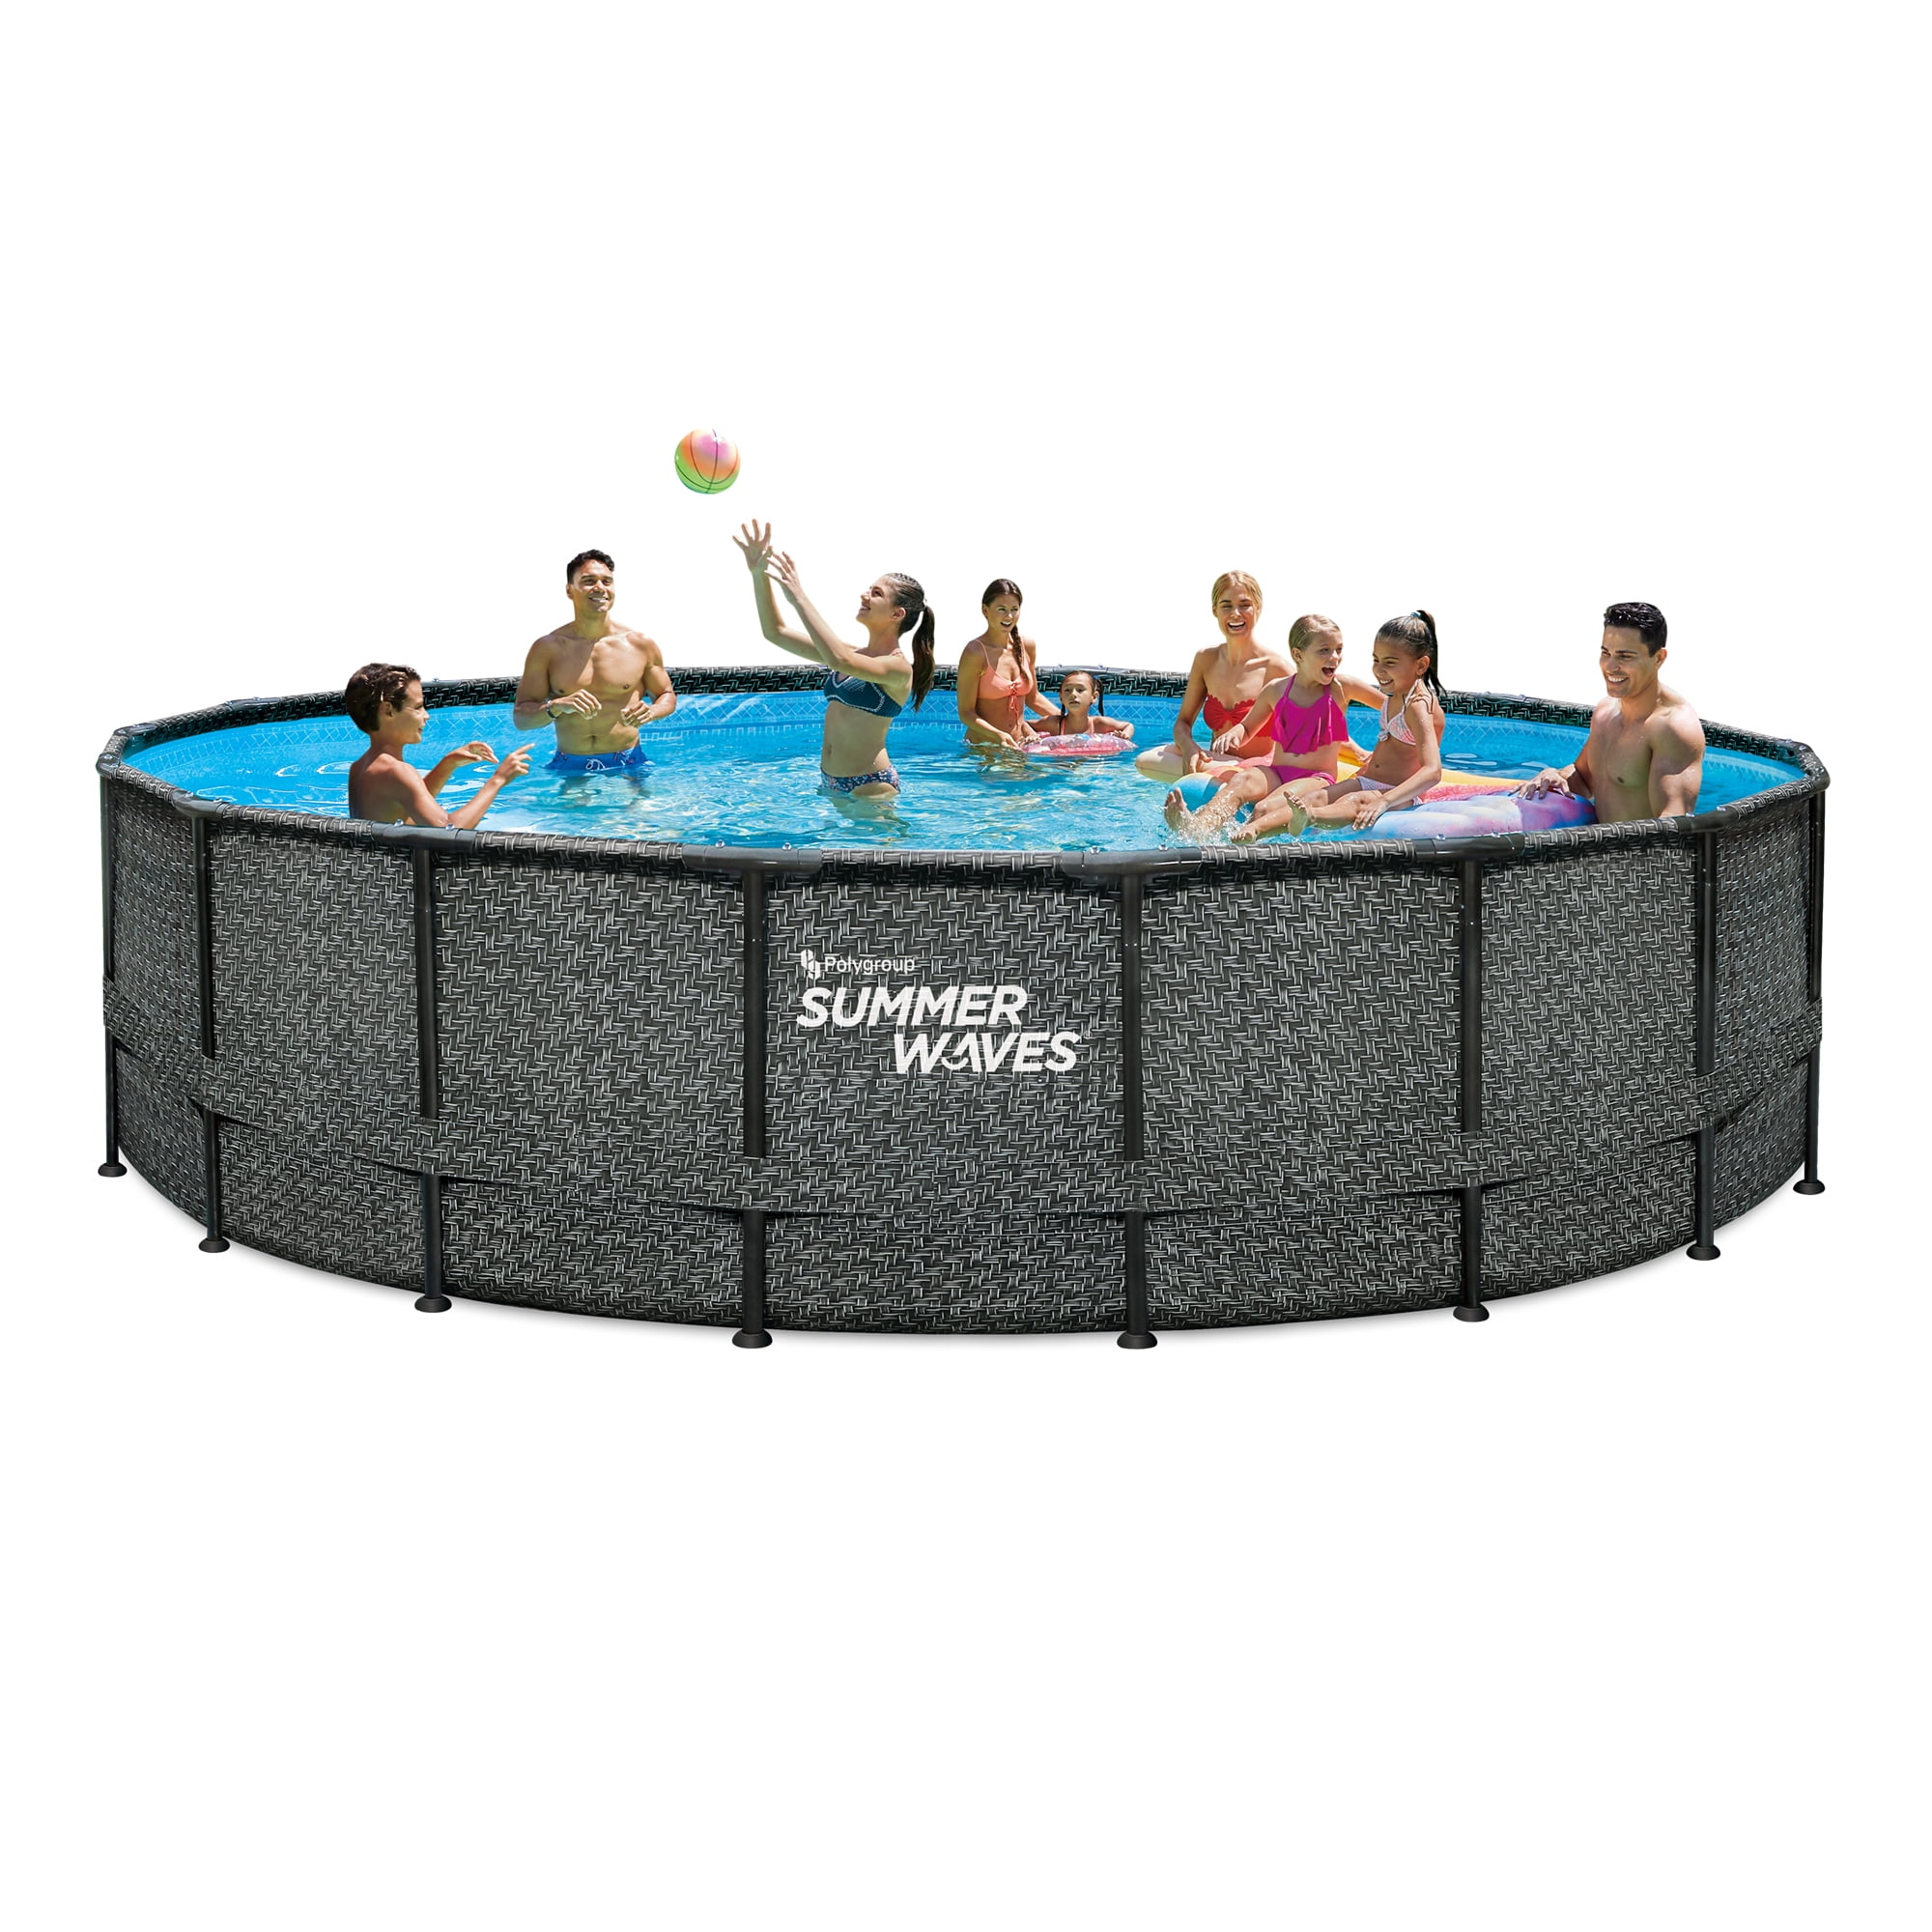 The Summer Waves ® 18' x 48" Elite Frame Pool with exterior wicke...